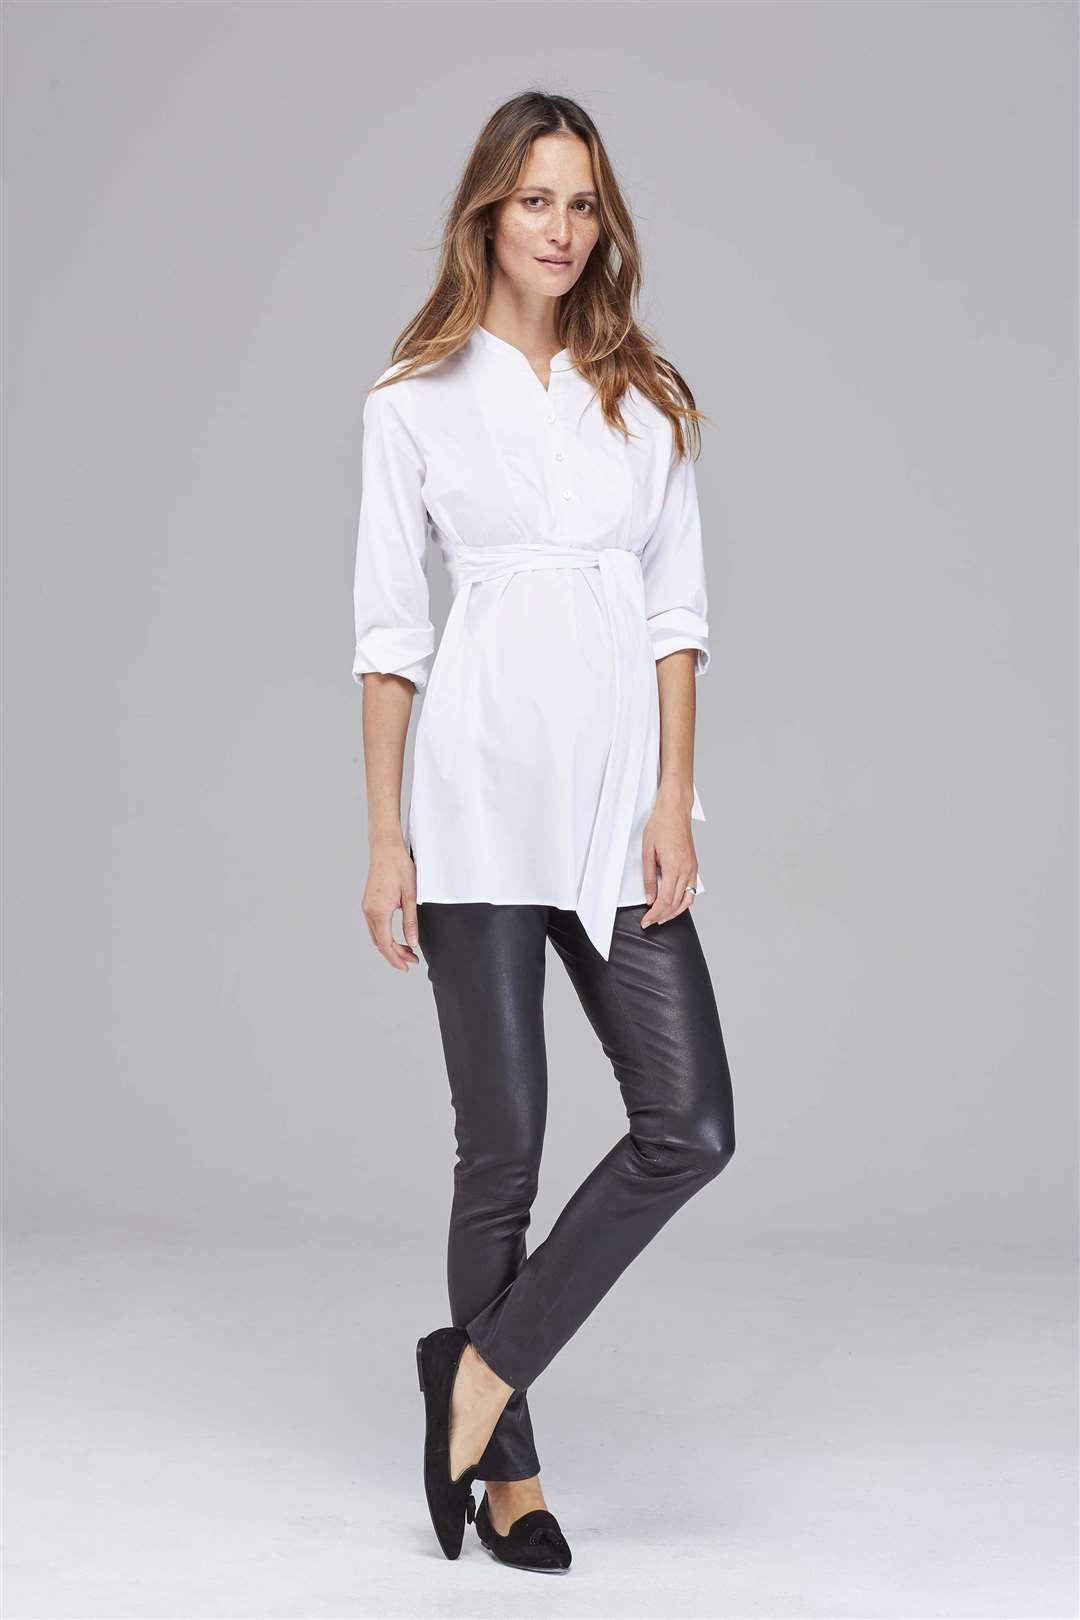 Try this Isabella Oliver Granville Maternity Shirt, £85